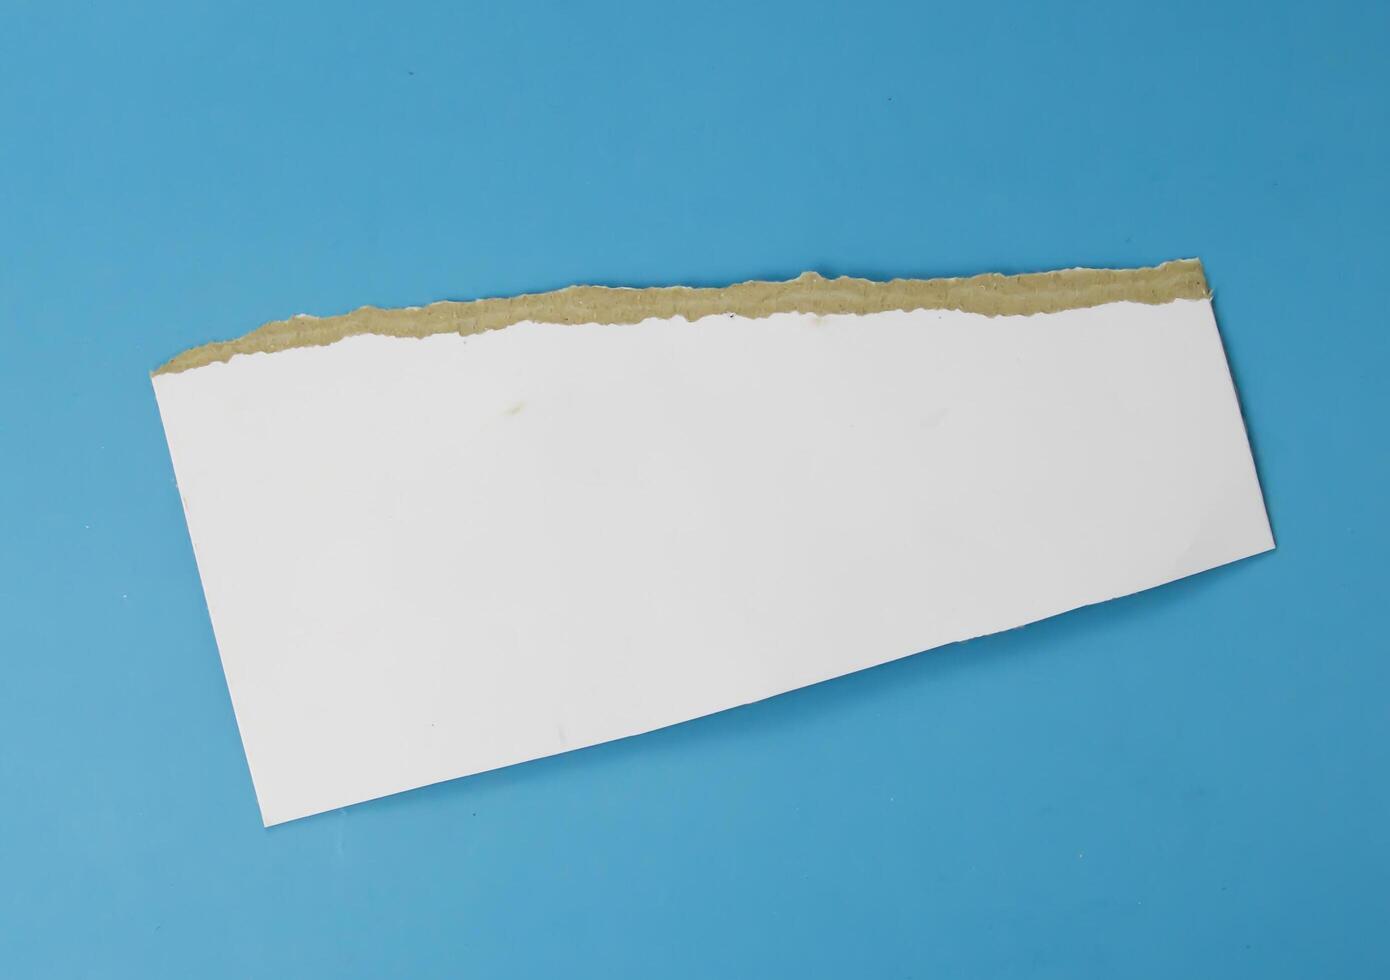 A white paper teared on isolated blue background used for element of design photo